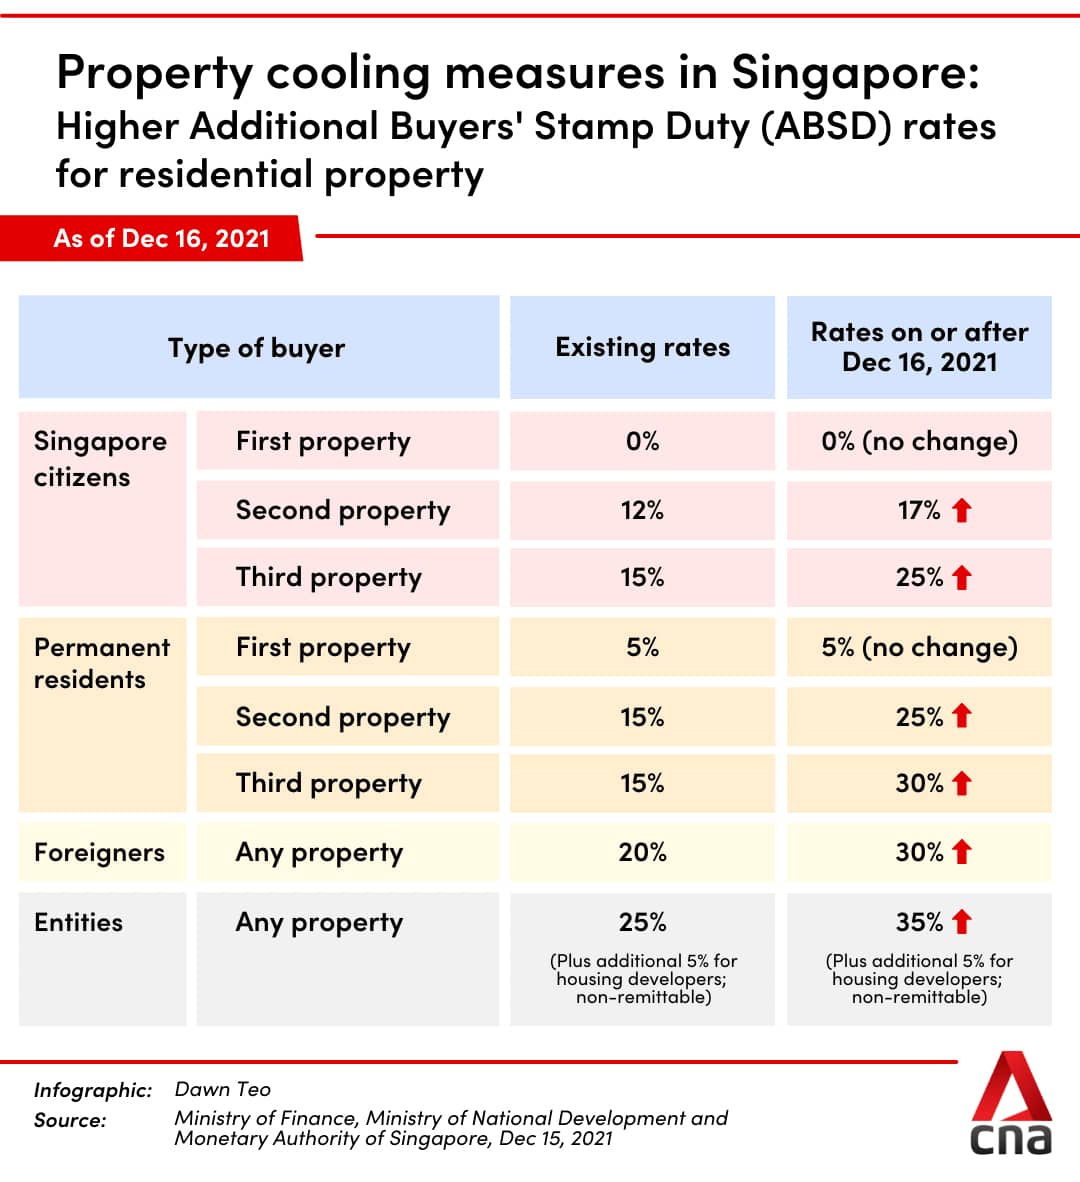 Property Cooling Measures in Singapore 16 December 2021 by CNA